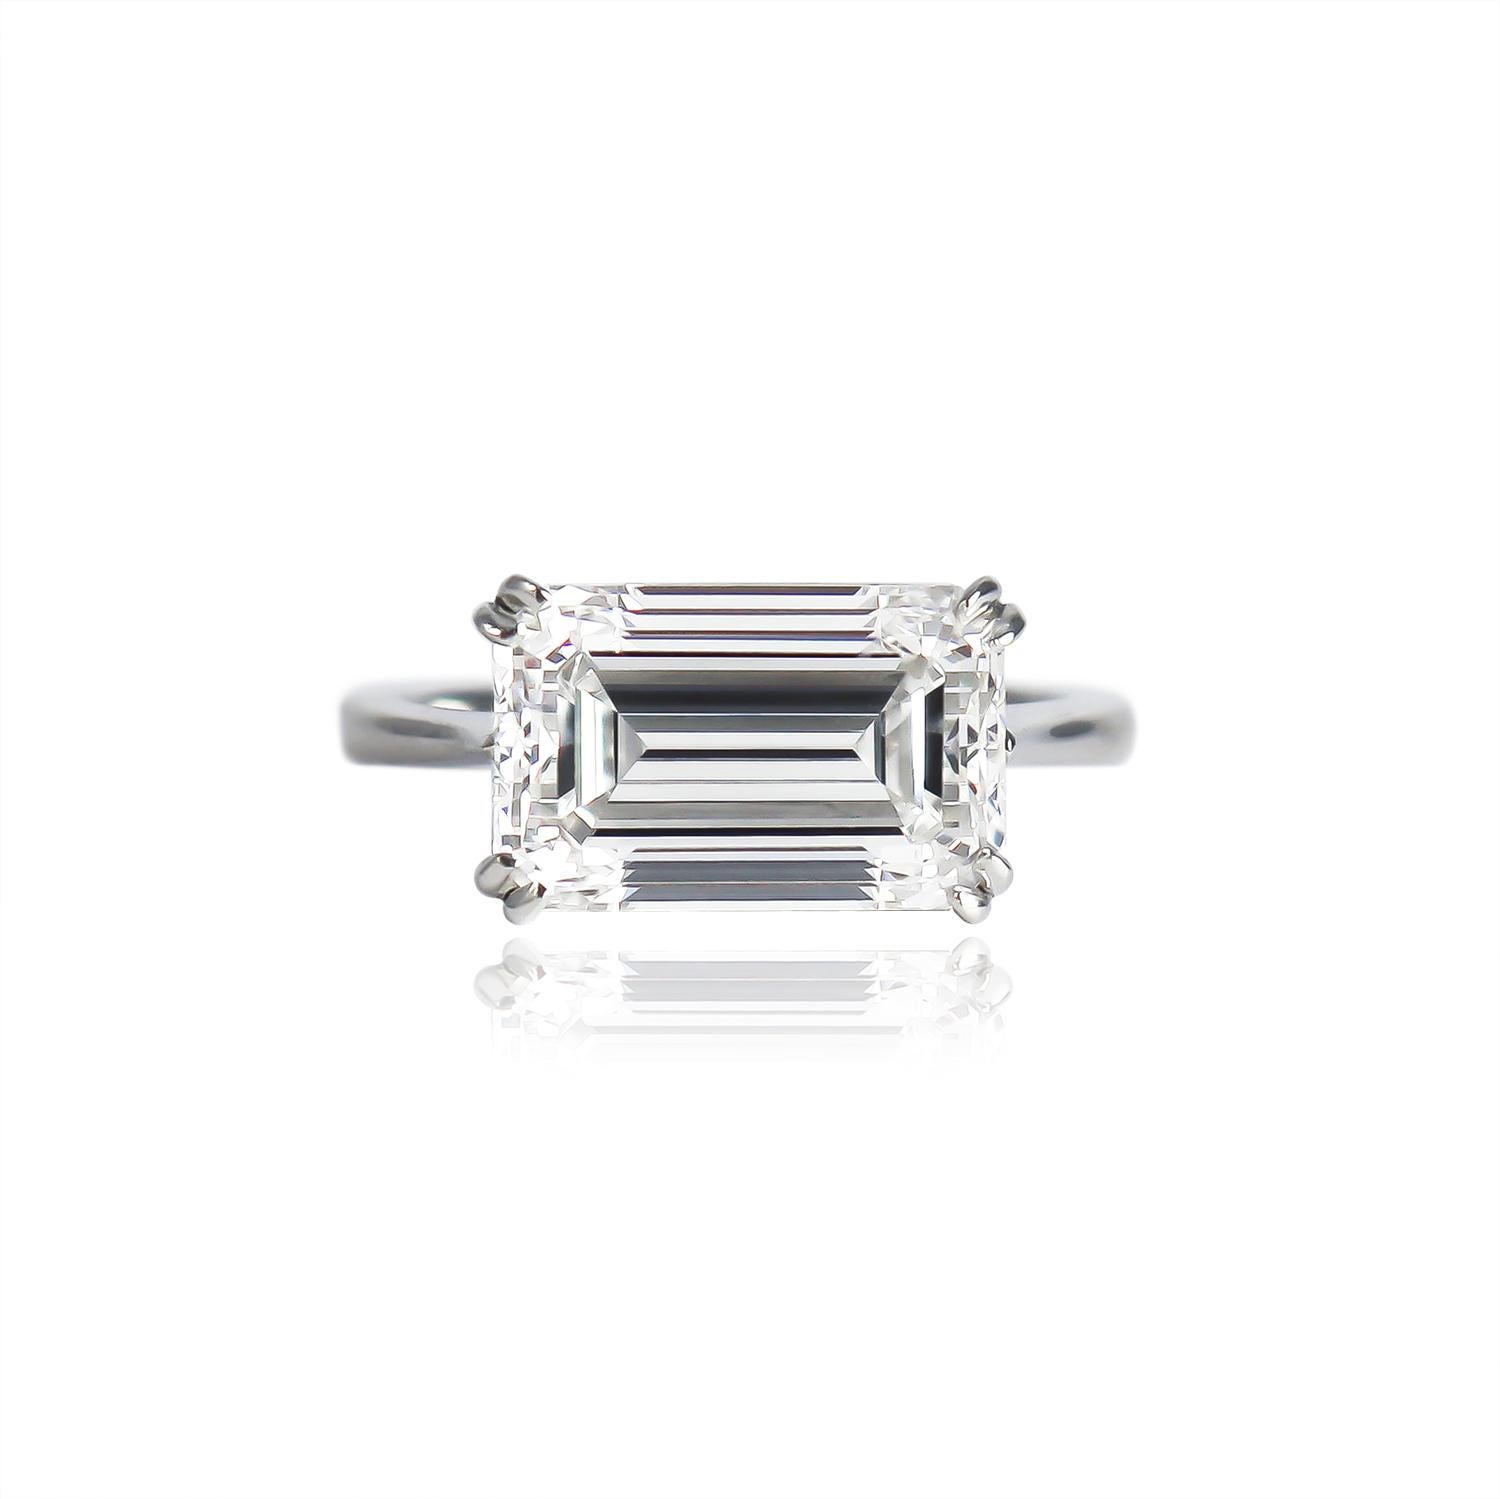 This edgy and breathtaking ring from the J. Birnbach workshop features a 5.01 carat emerald cut diamond of F color and SI1 clarity. With an incredible, 100% eye-clean SI1 clarity grade and an elegant, elongated outline, this charming diamond is set